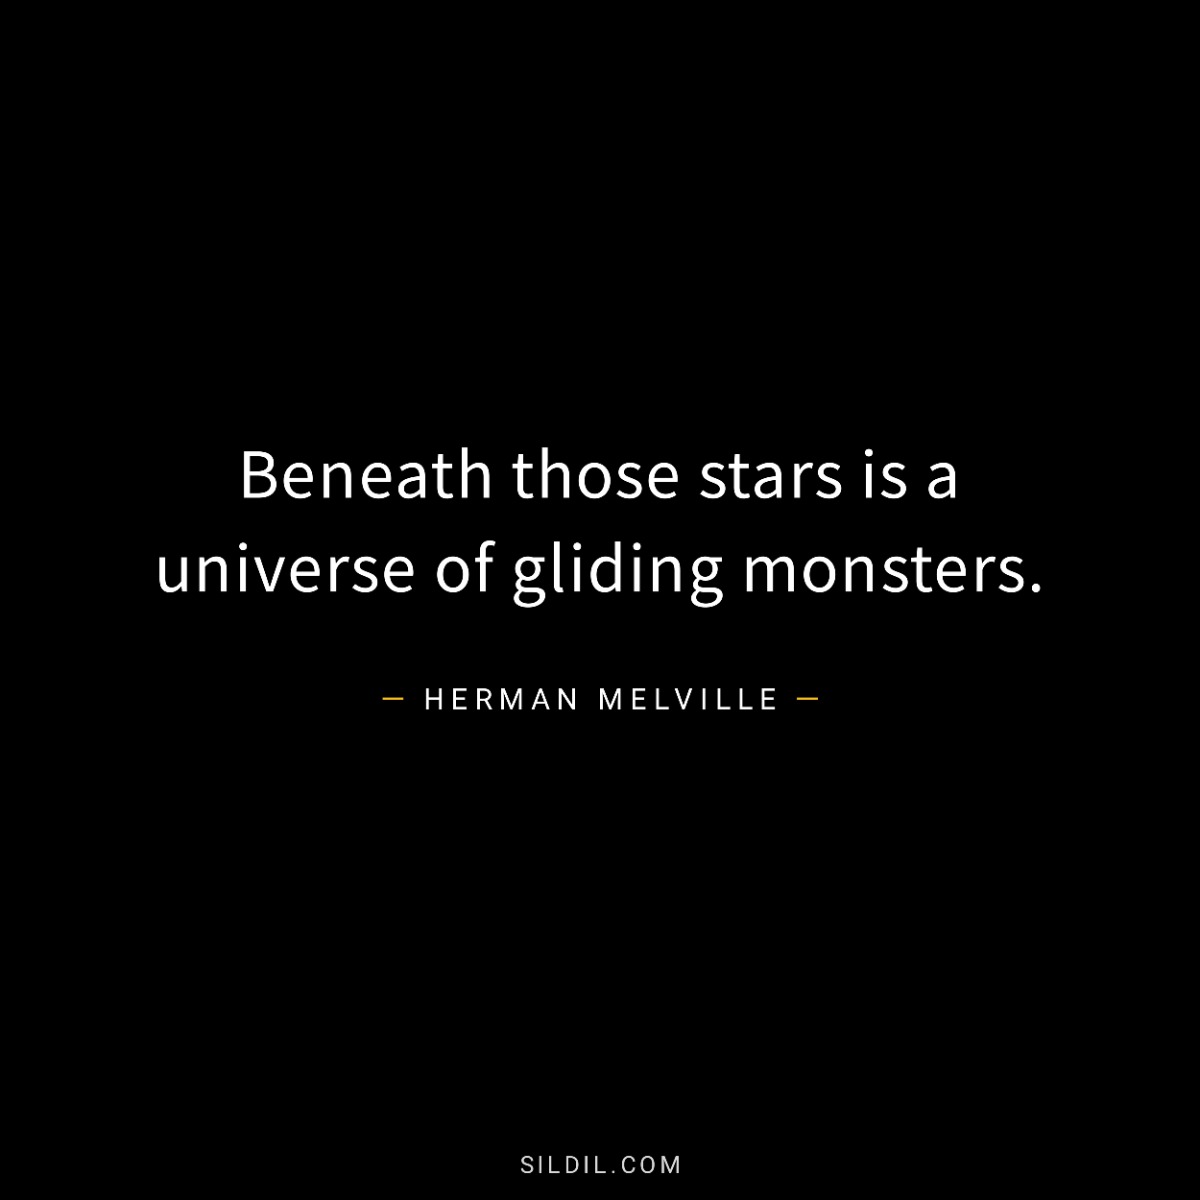 Beneath those stars is a universe of gliding monsters.